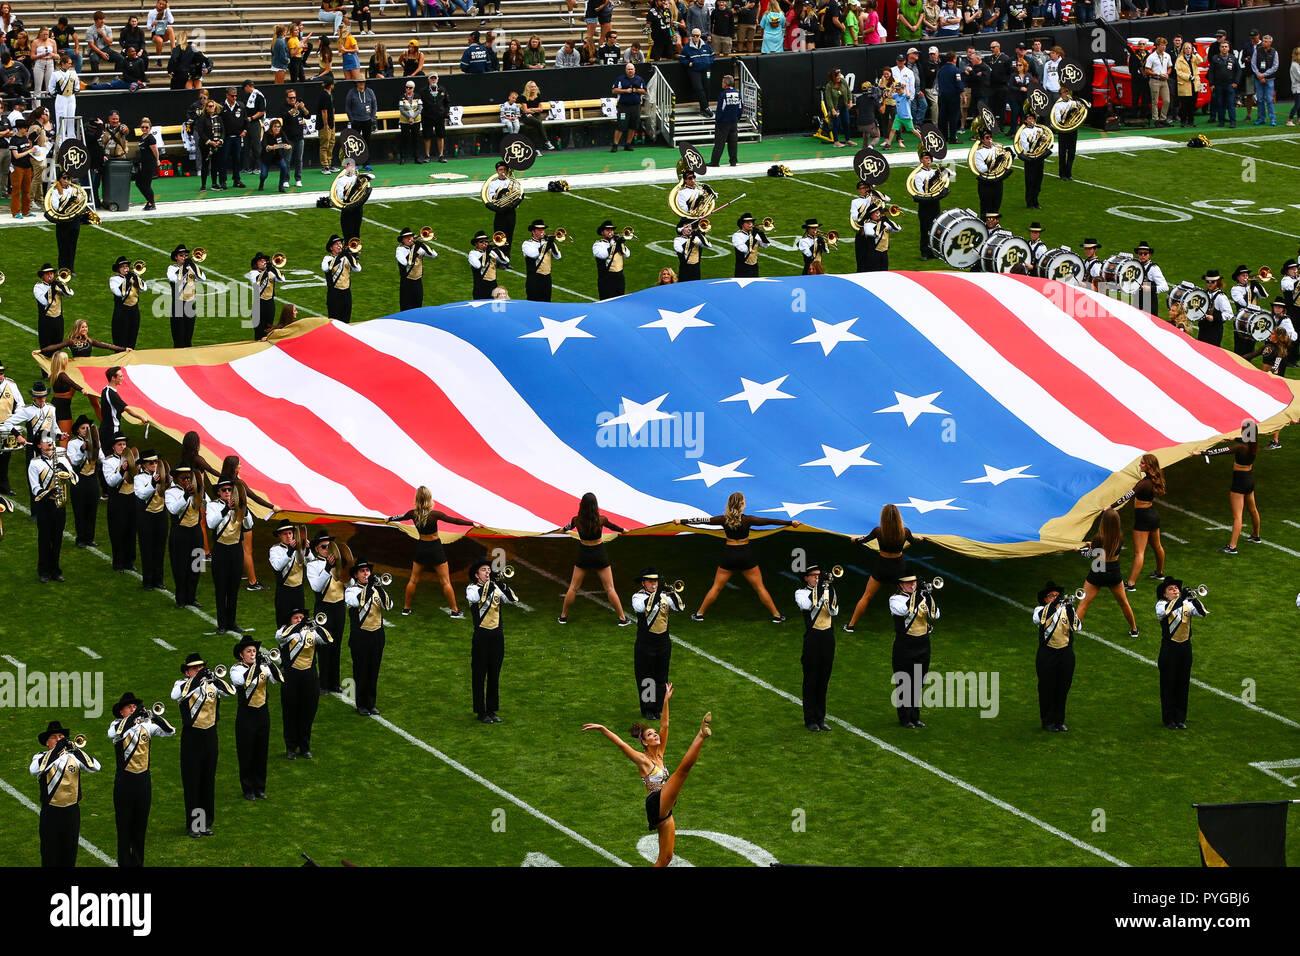 Overtime. 27th Oct, 2018. The Colorado marching band performs the National Anthem before the game against Oregon State at Folsom Field. Colorado blew a 31-3 third quarter lead and lost 41-34 in overtime. Credit: csm/Alamy Live News Stock Photo